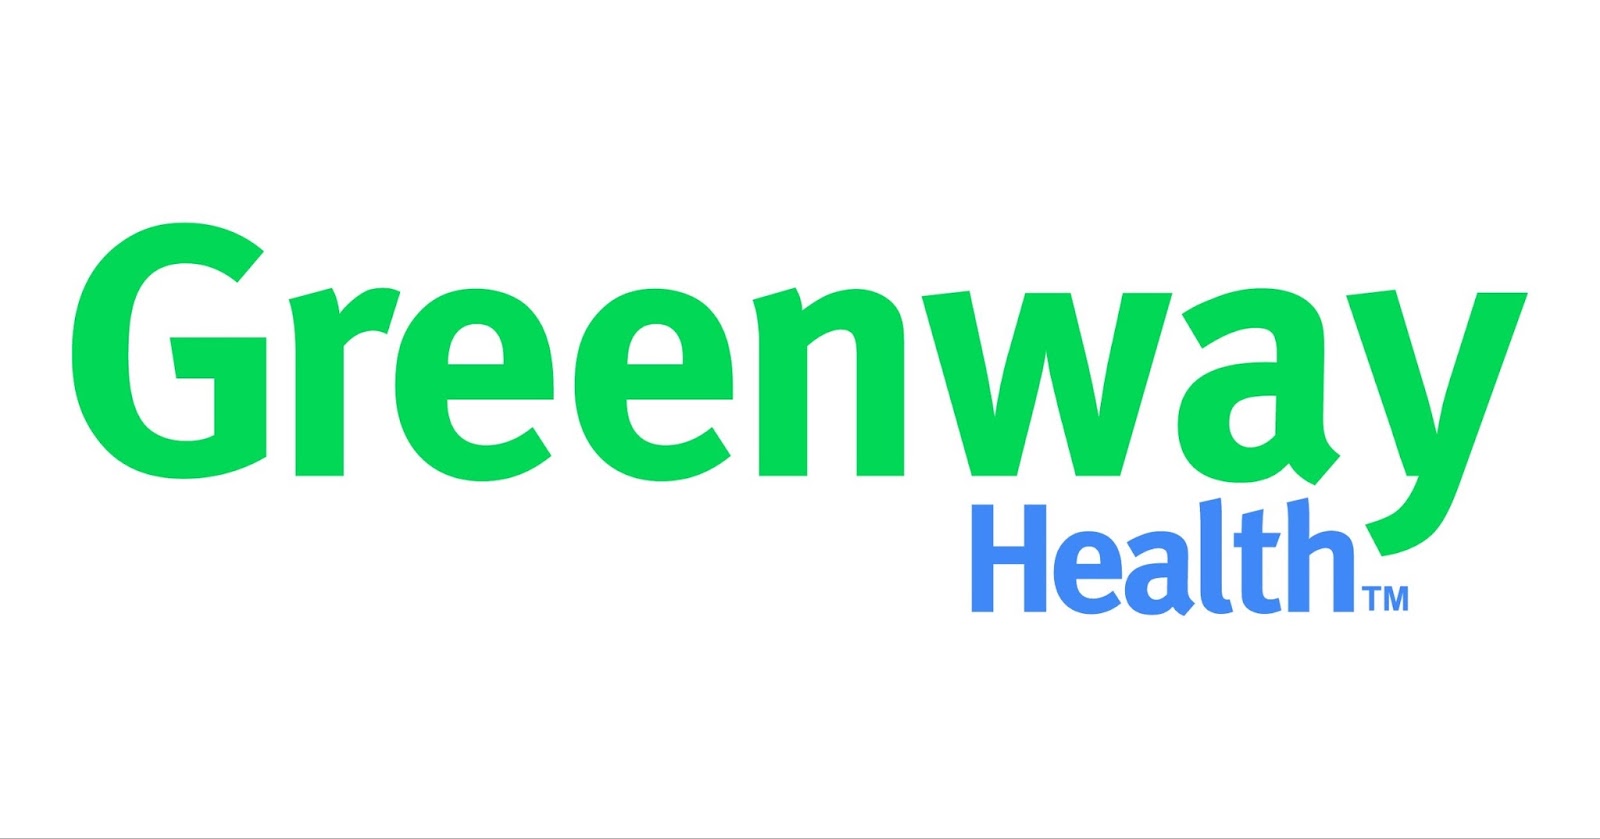 image showing greenway health as one of the best patient management software